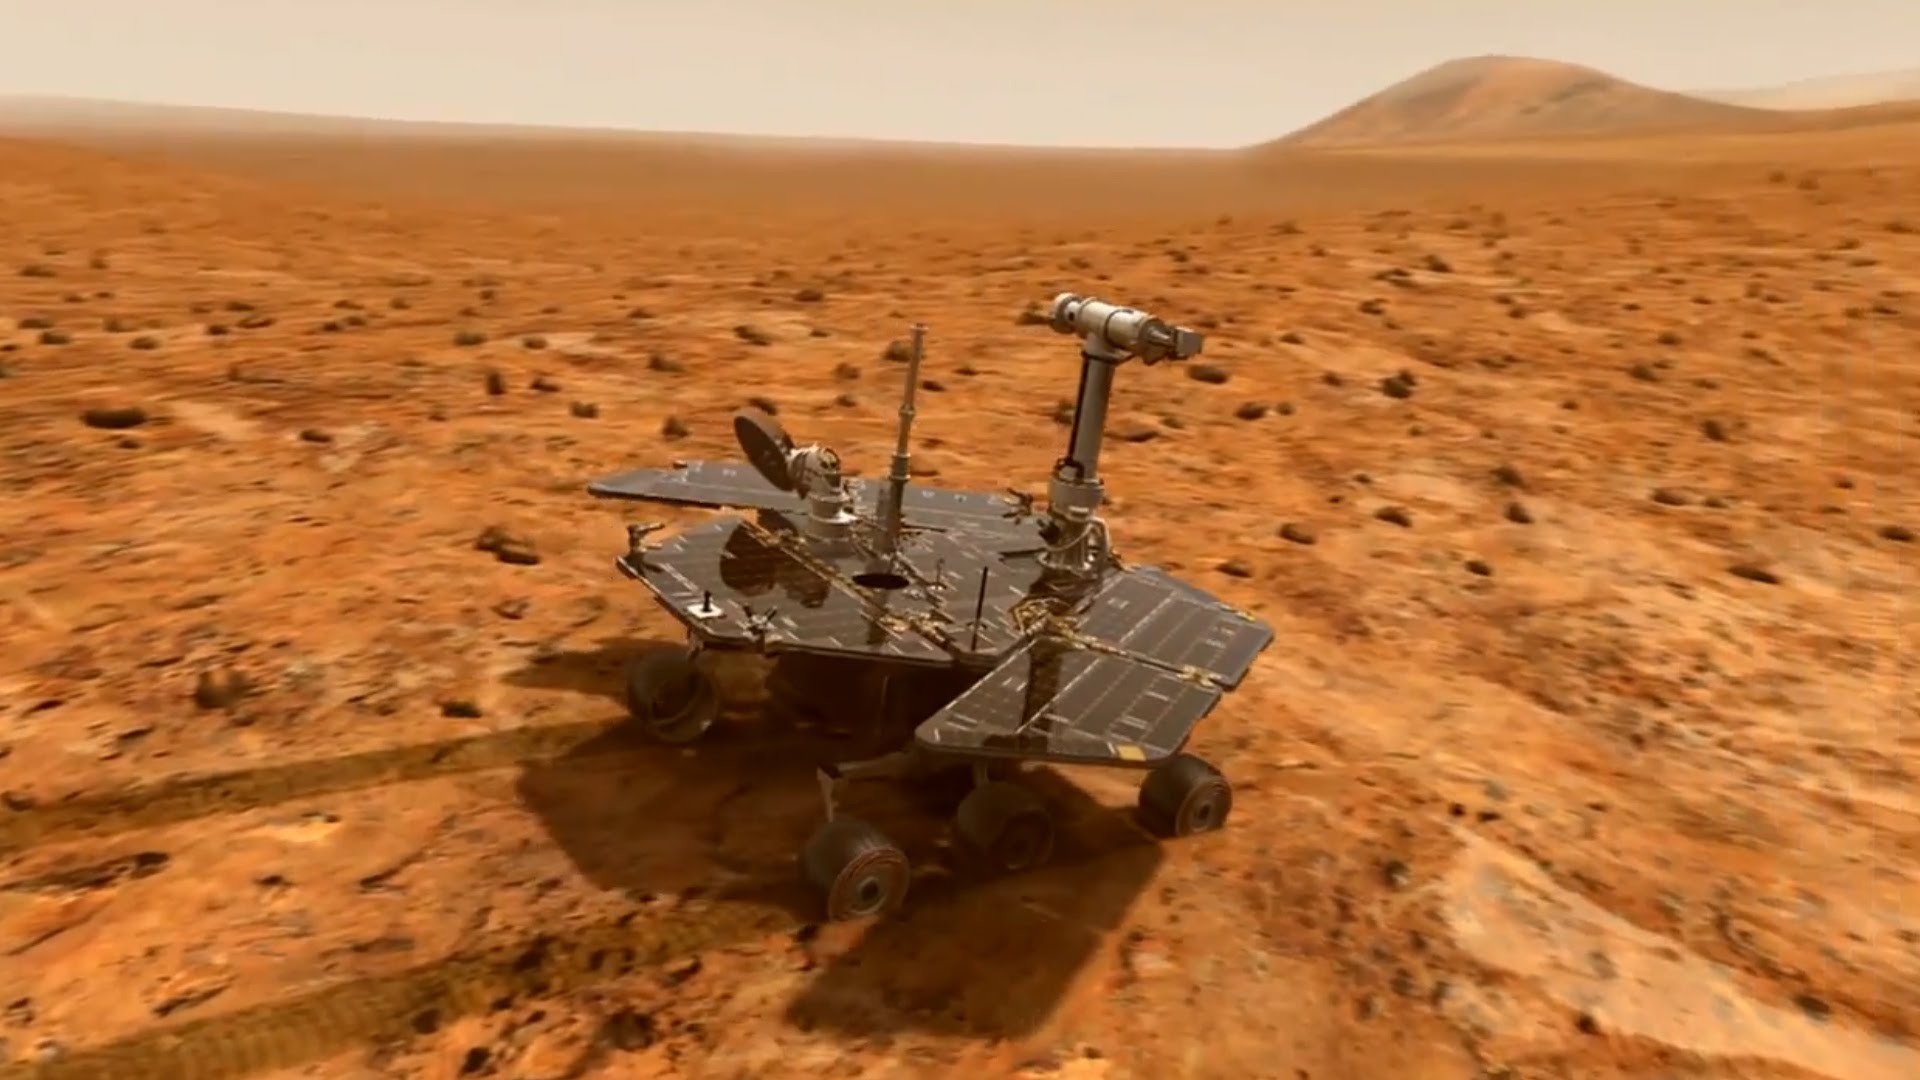 1920x1080 Celebrating the Opportunity rover's tenth anniversary on Mars - YouTube